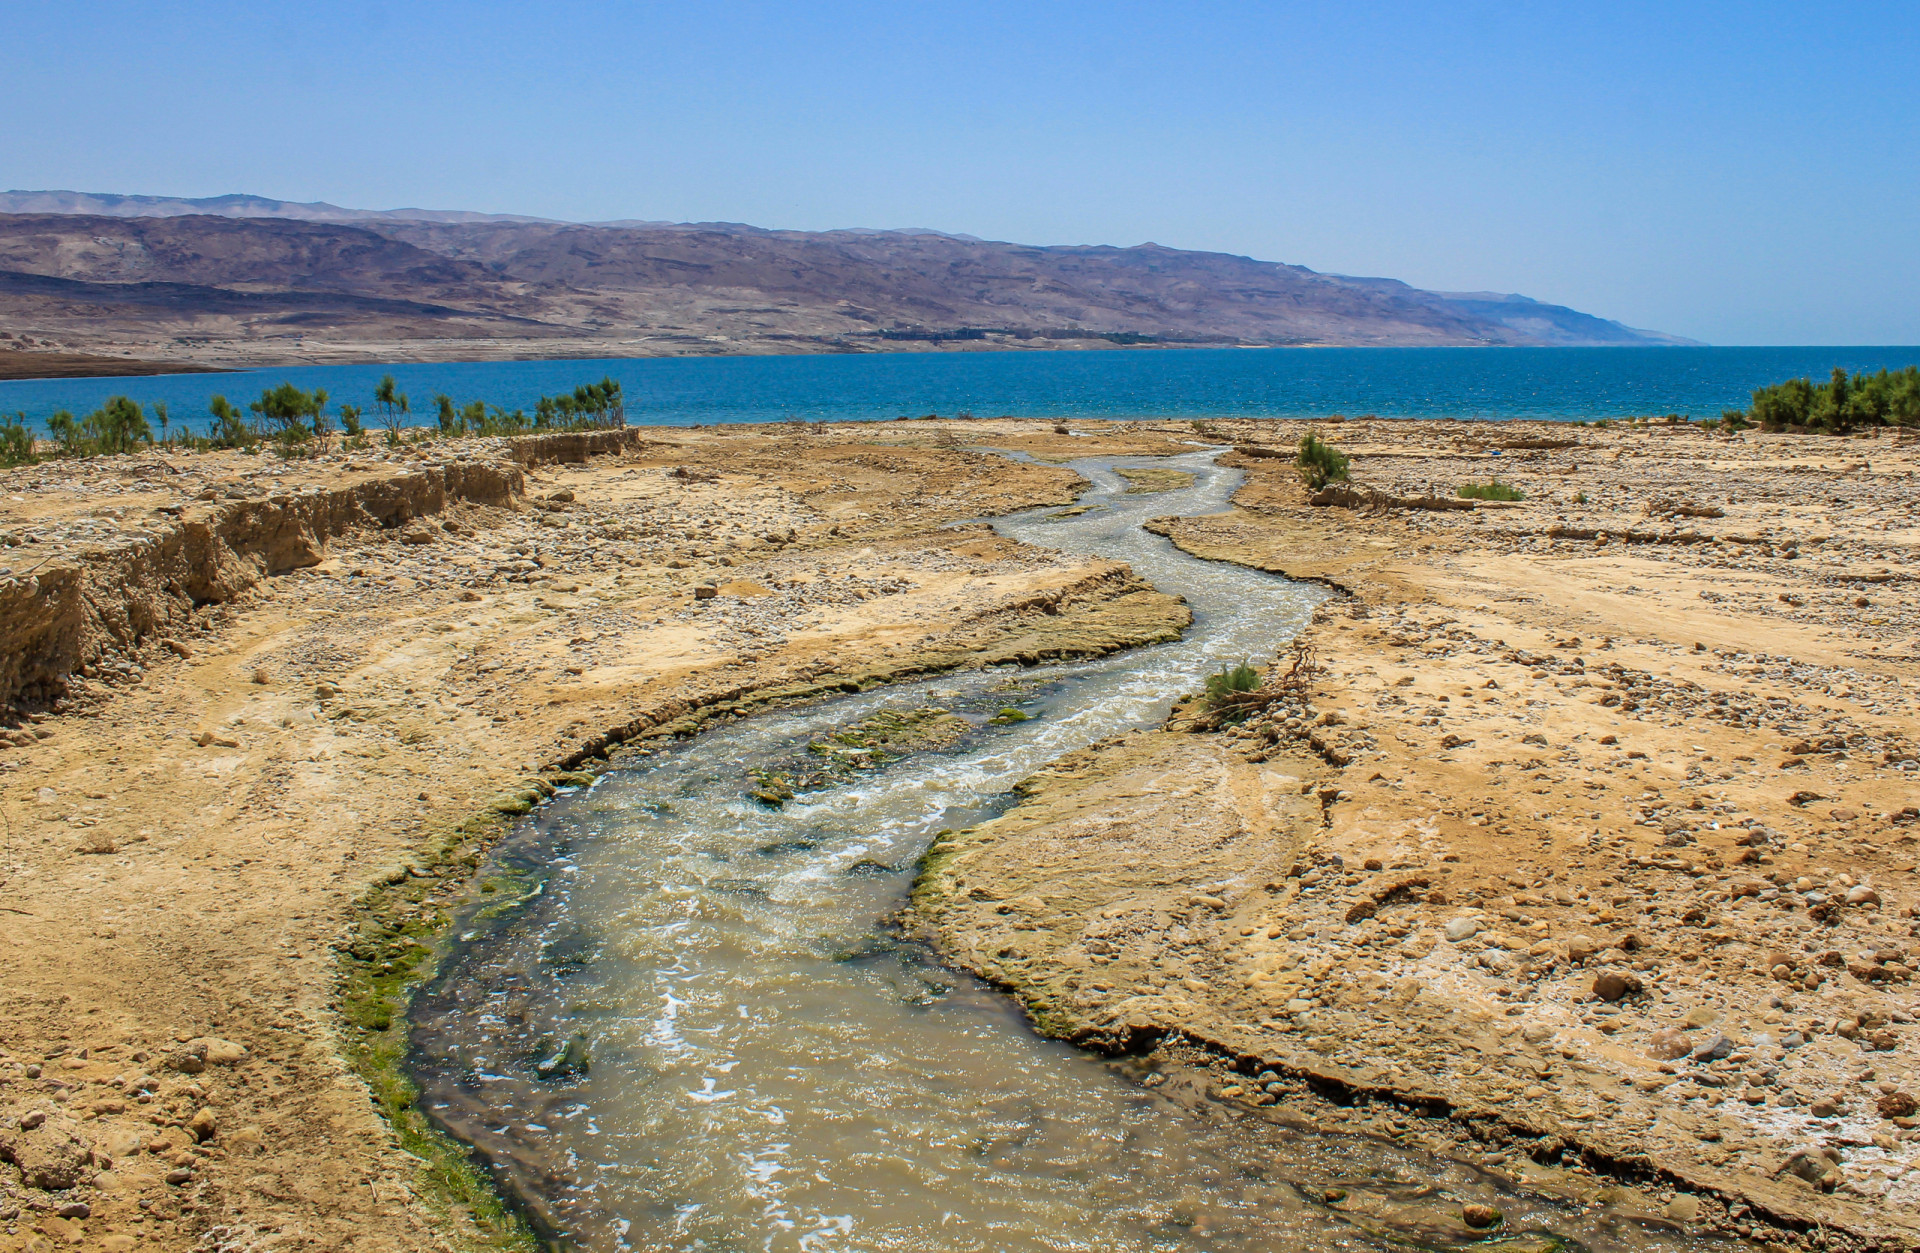 <p>This is due mostly to the siphoning off just below the Sea of Galilee of huge amounts of water from the River Jordan by Israel, Jordan, and Syria to meet their needs in this arid region.</p><p><a href="https://www.msn.com/en-us/community/channel/vid-7xx8mnucu55yw63we9va2gwr7uihbxwc68fxqp25x6tg4ftibpra?cvid=94631541bc0f4f89bfd59158d696ad7e">Follow us and access great exclusive content every day</a></p>